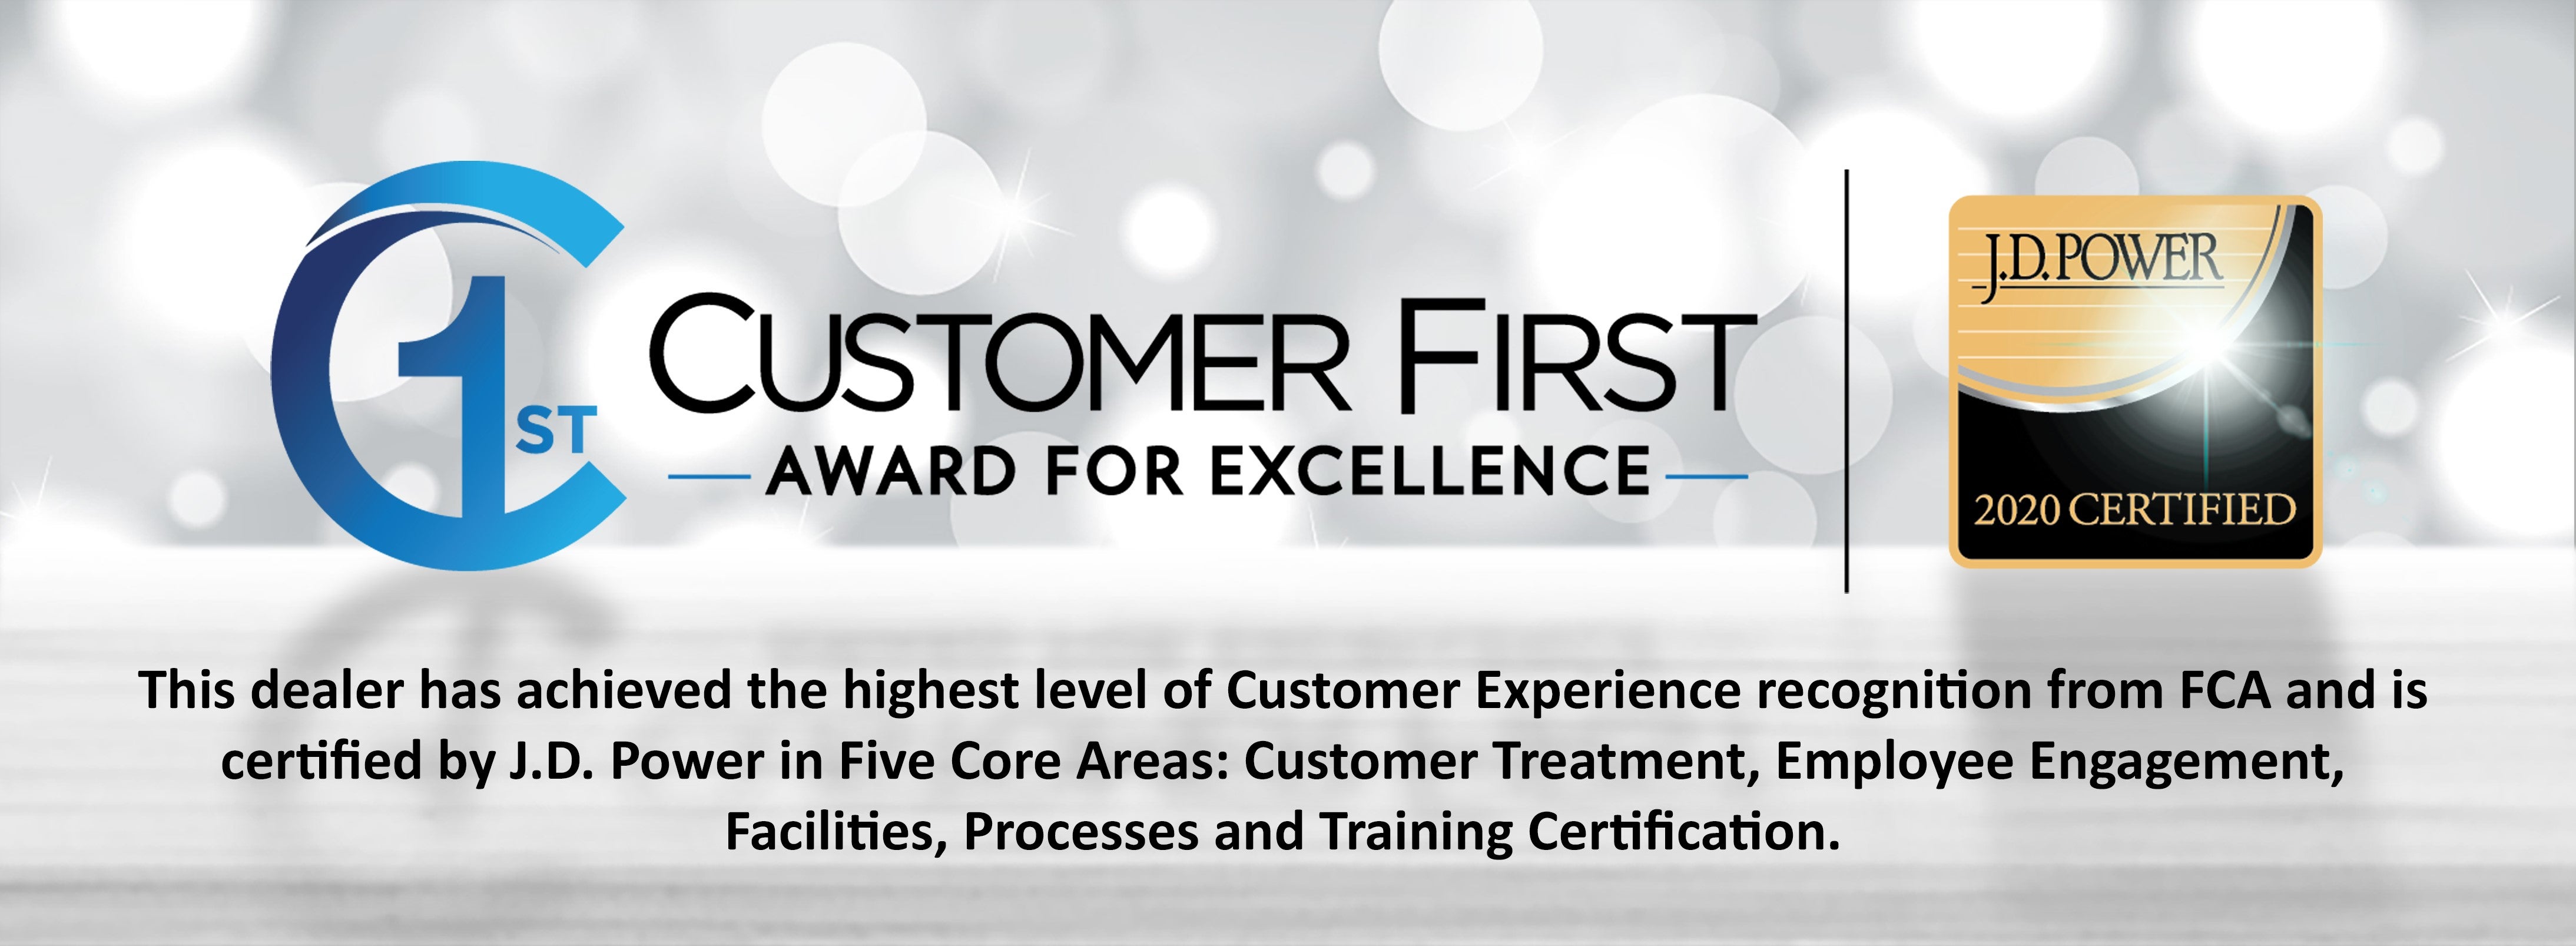 Customer First Award for Excellence for 2019 at Chilson-Wilcox Inc in Painted Post, NY